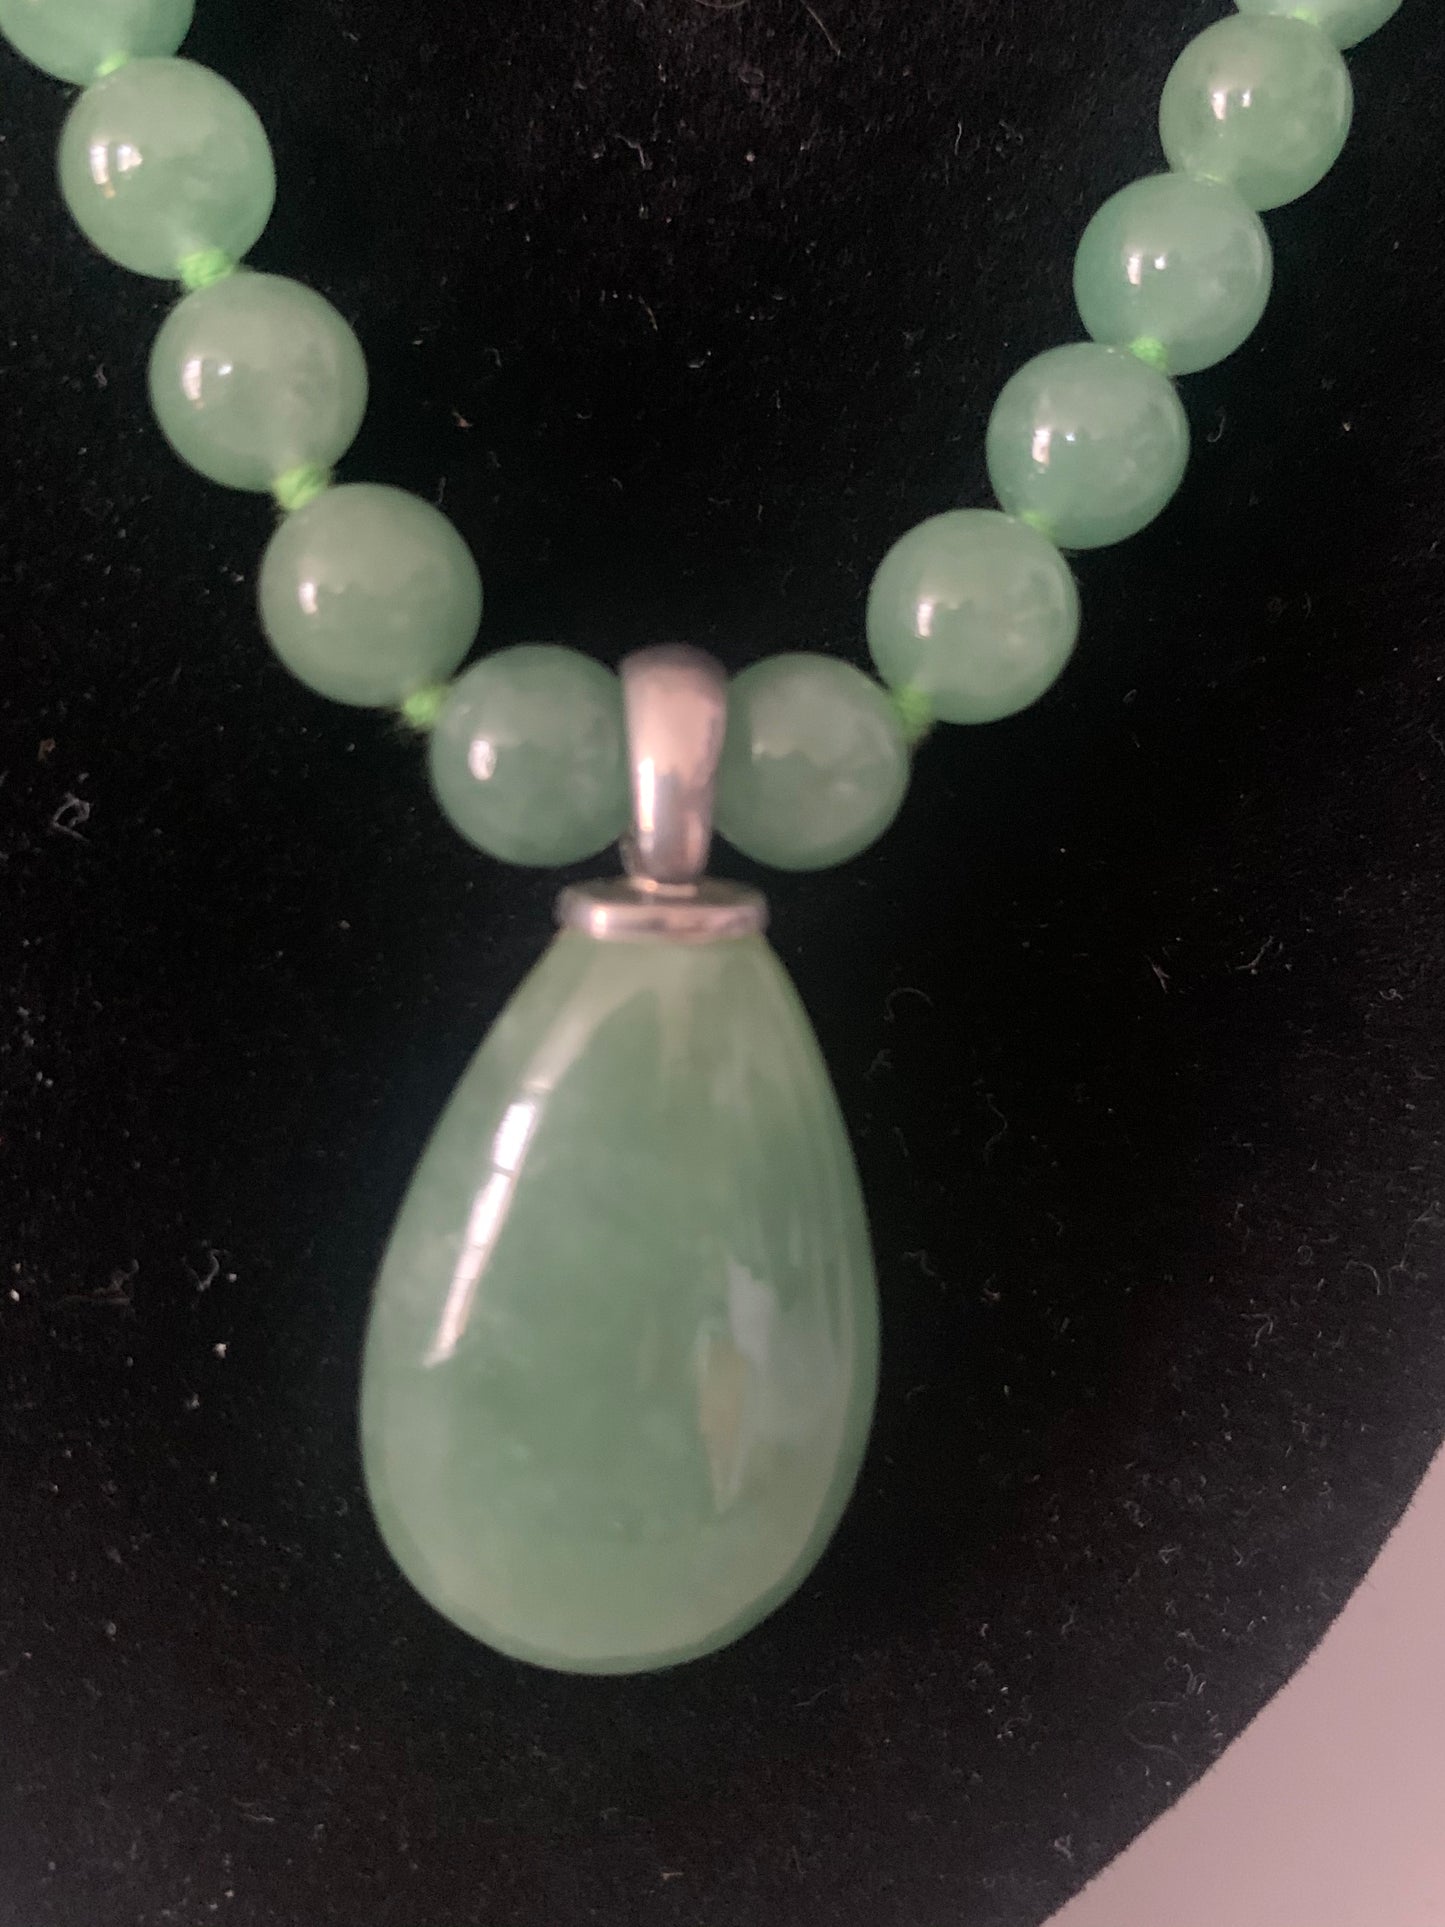 Jade pendant and necklace